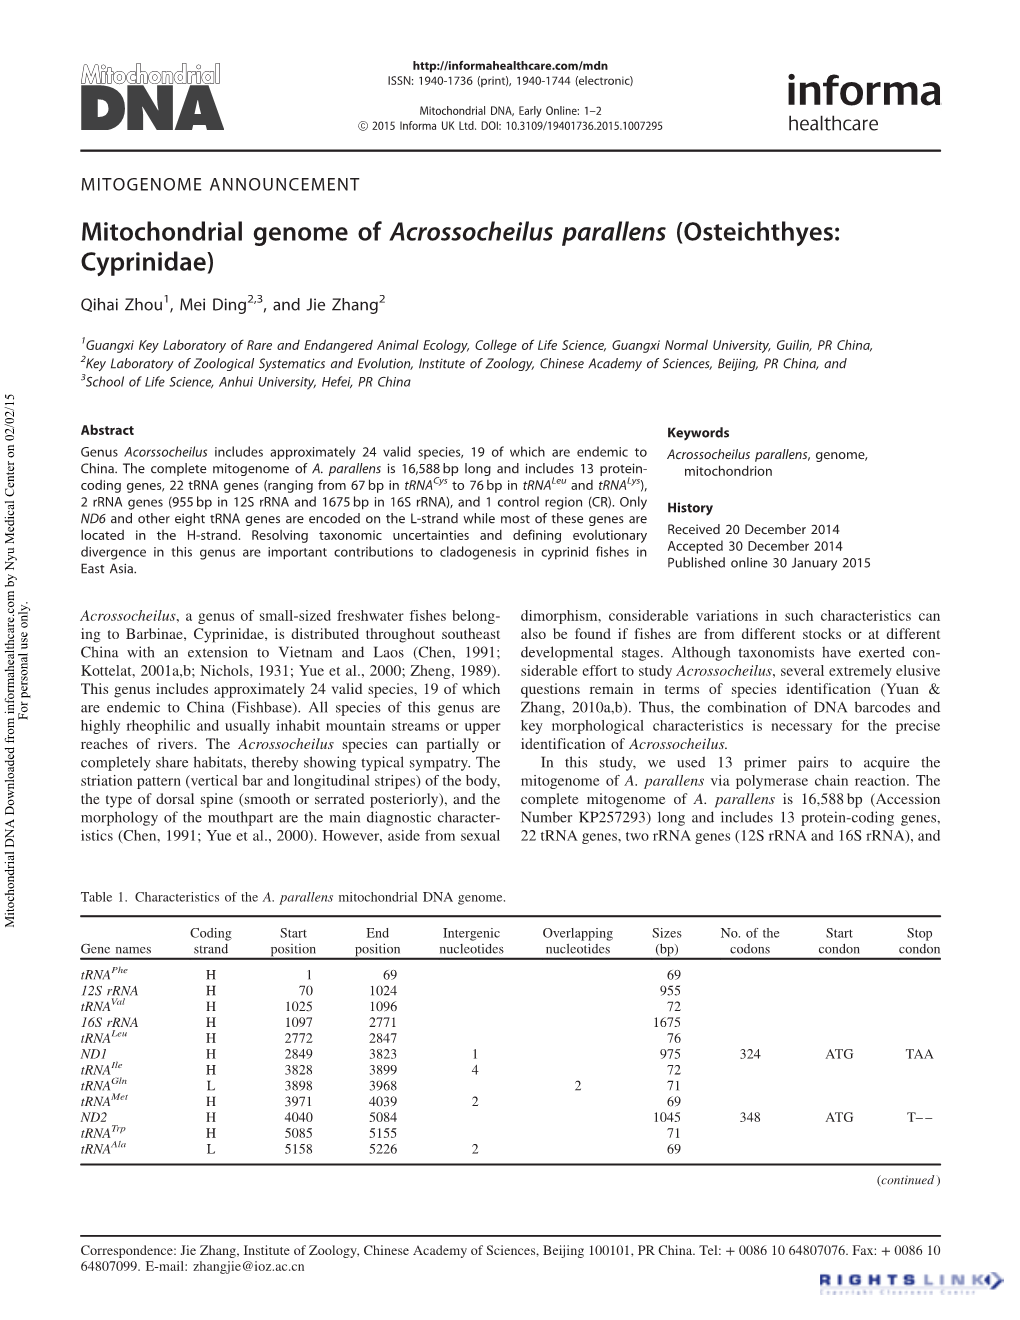 Mitochondrial Genome of Acrossocheilus Parallens (Osteichthyes: Cyprinidae)